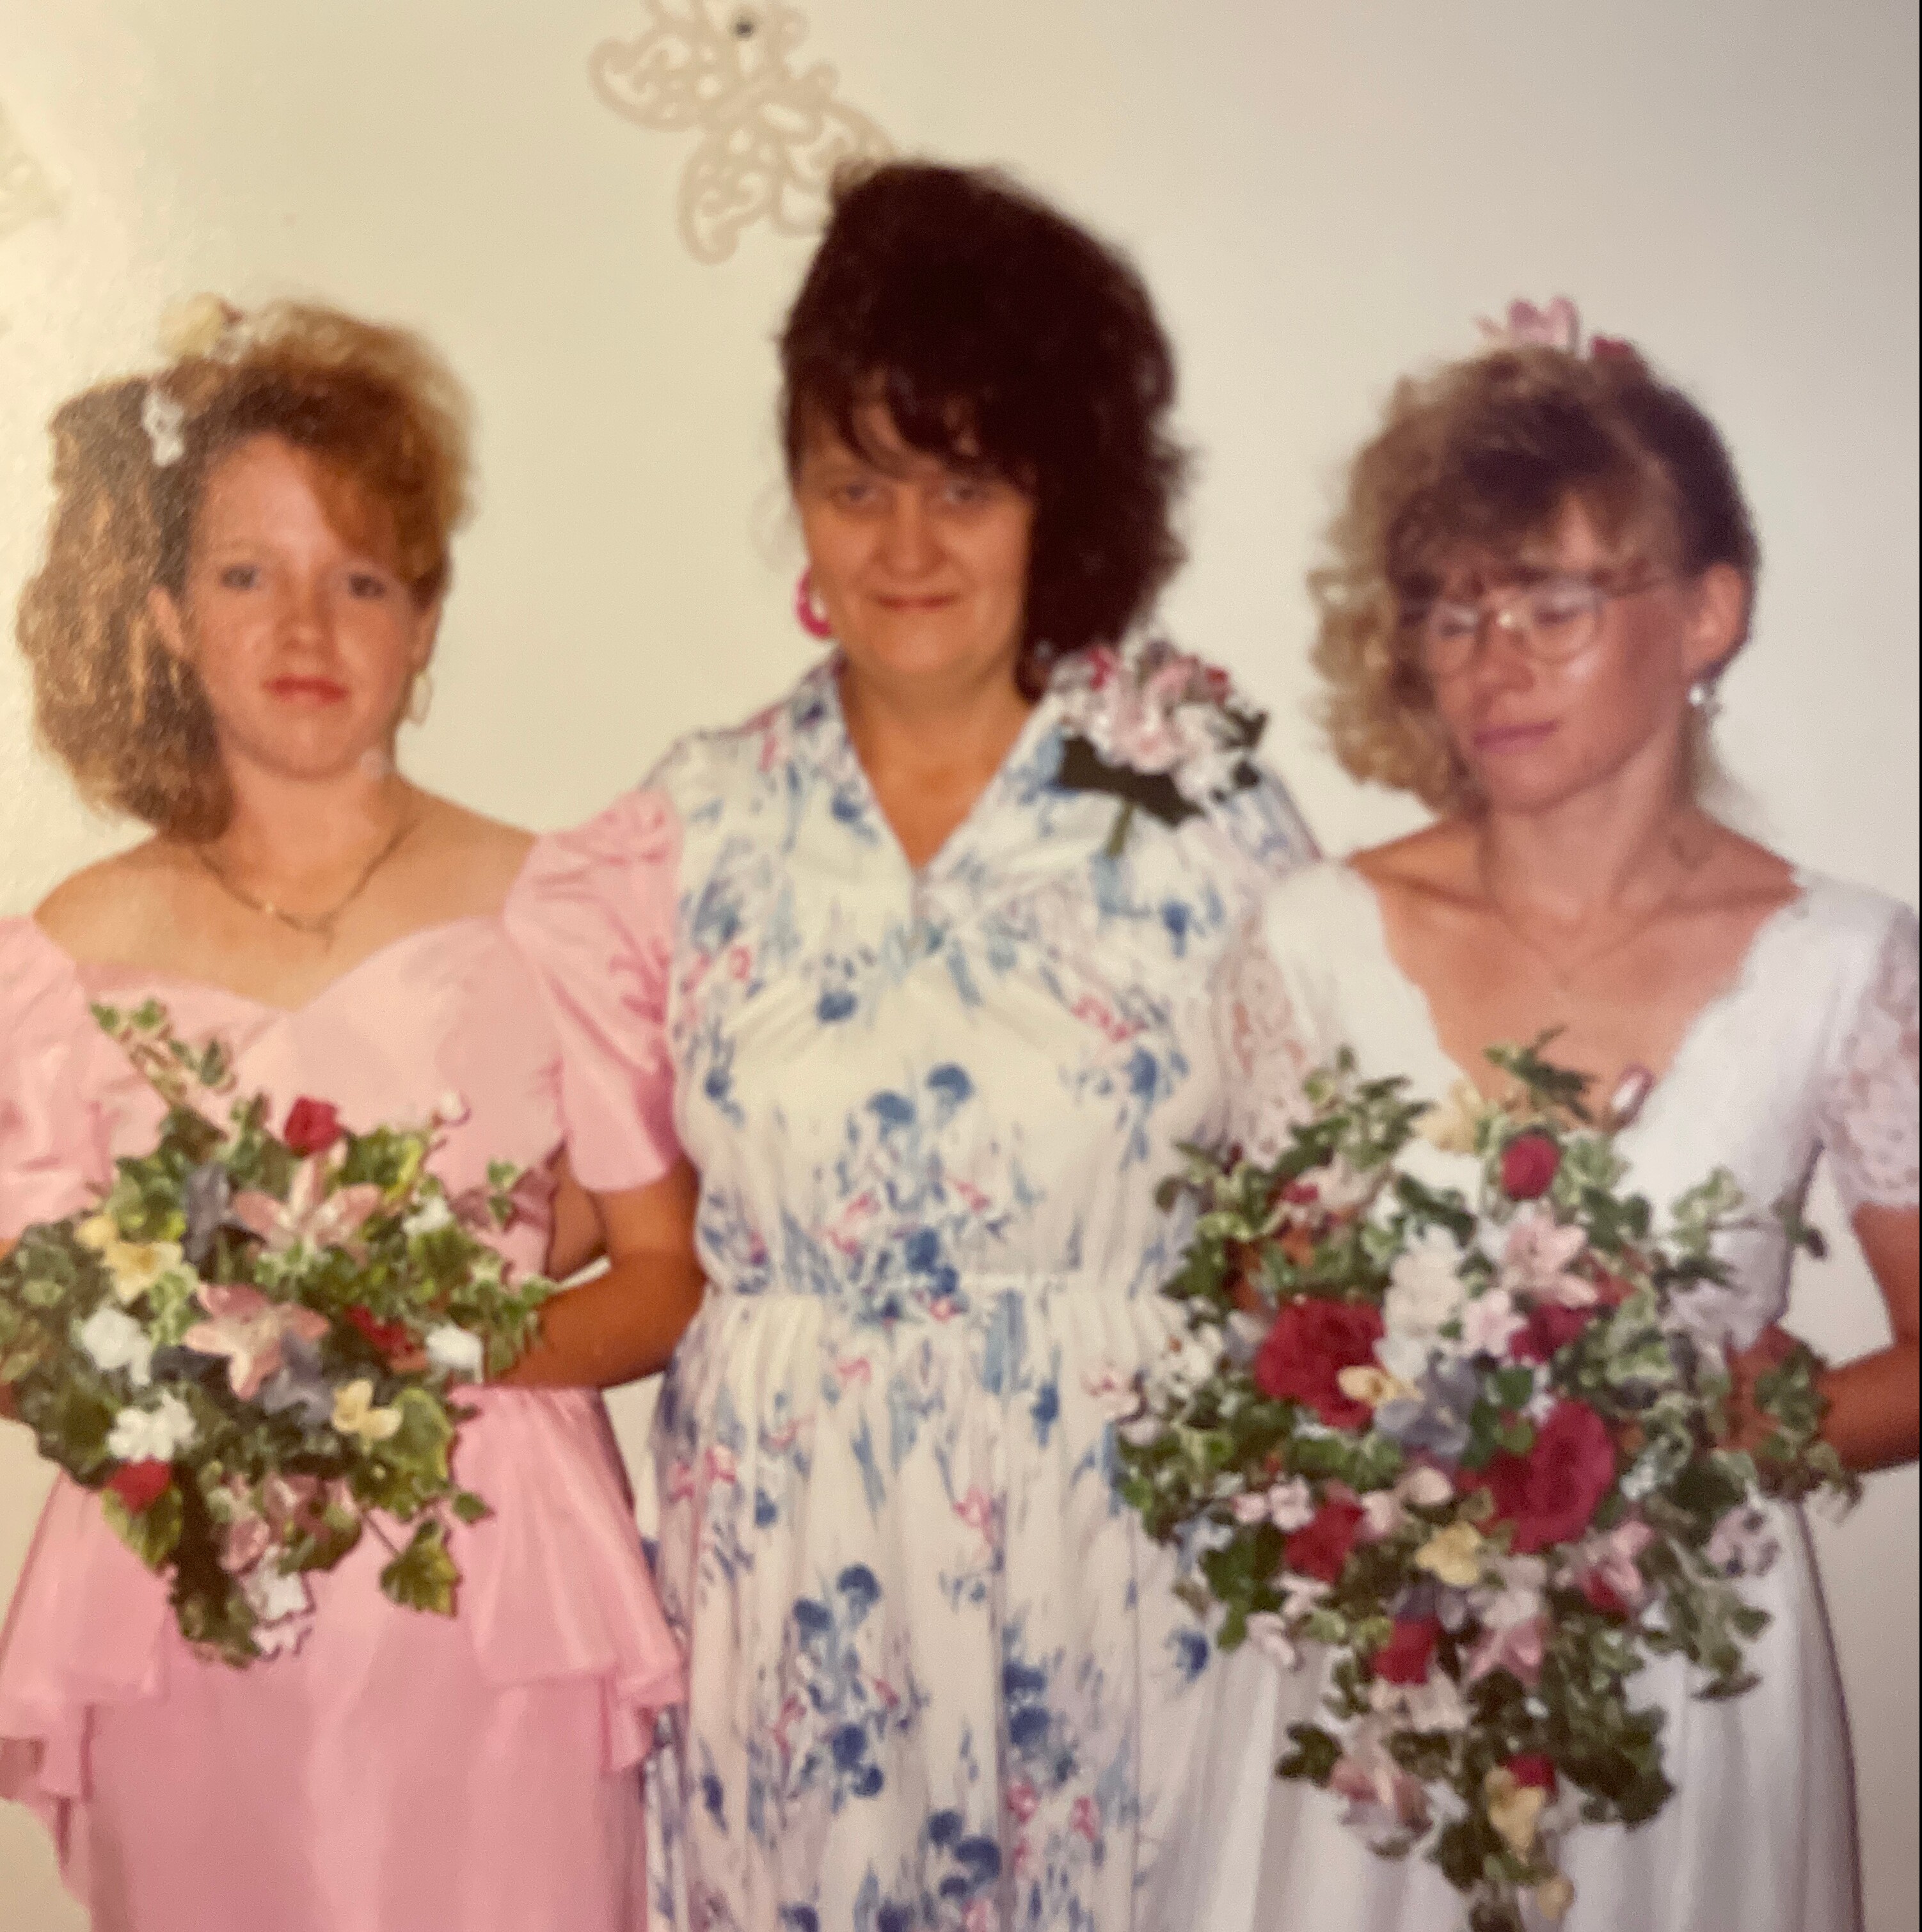 Debbie, Faith, and my ex-wife at my wedding in 1992.